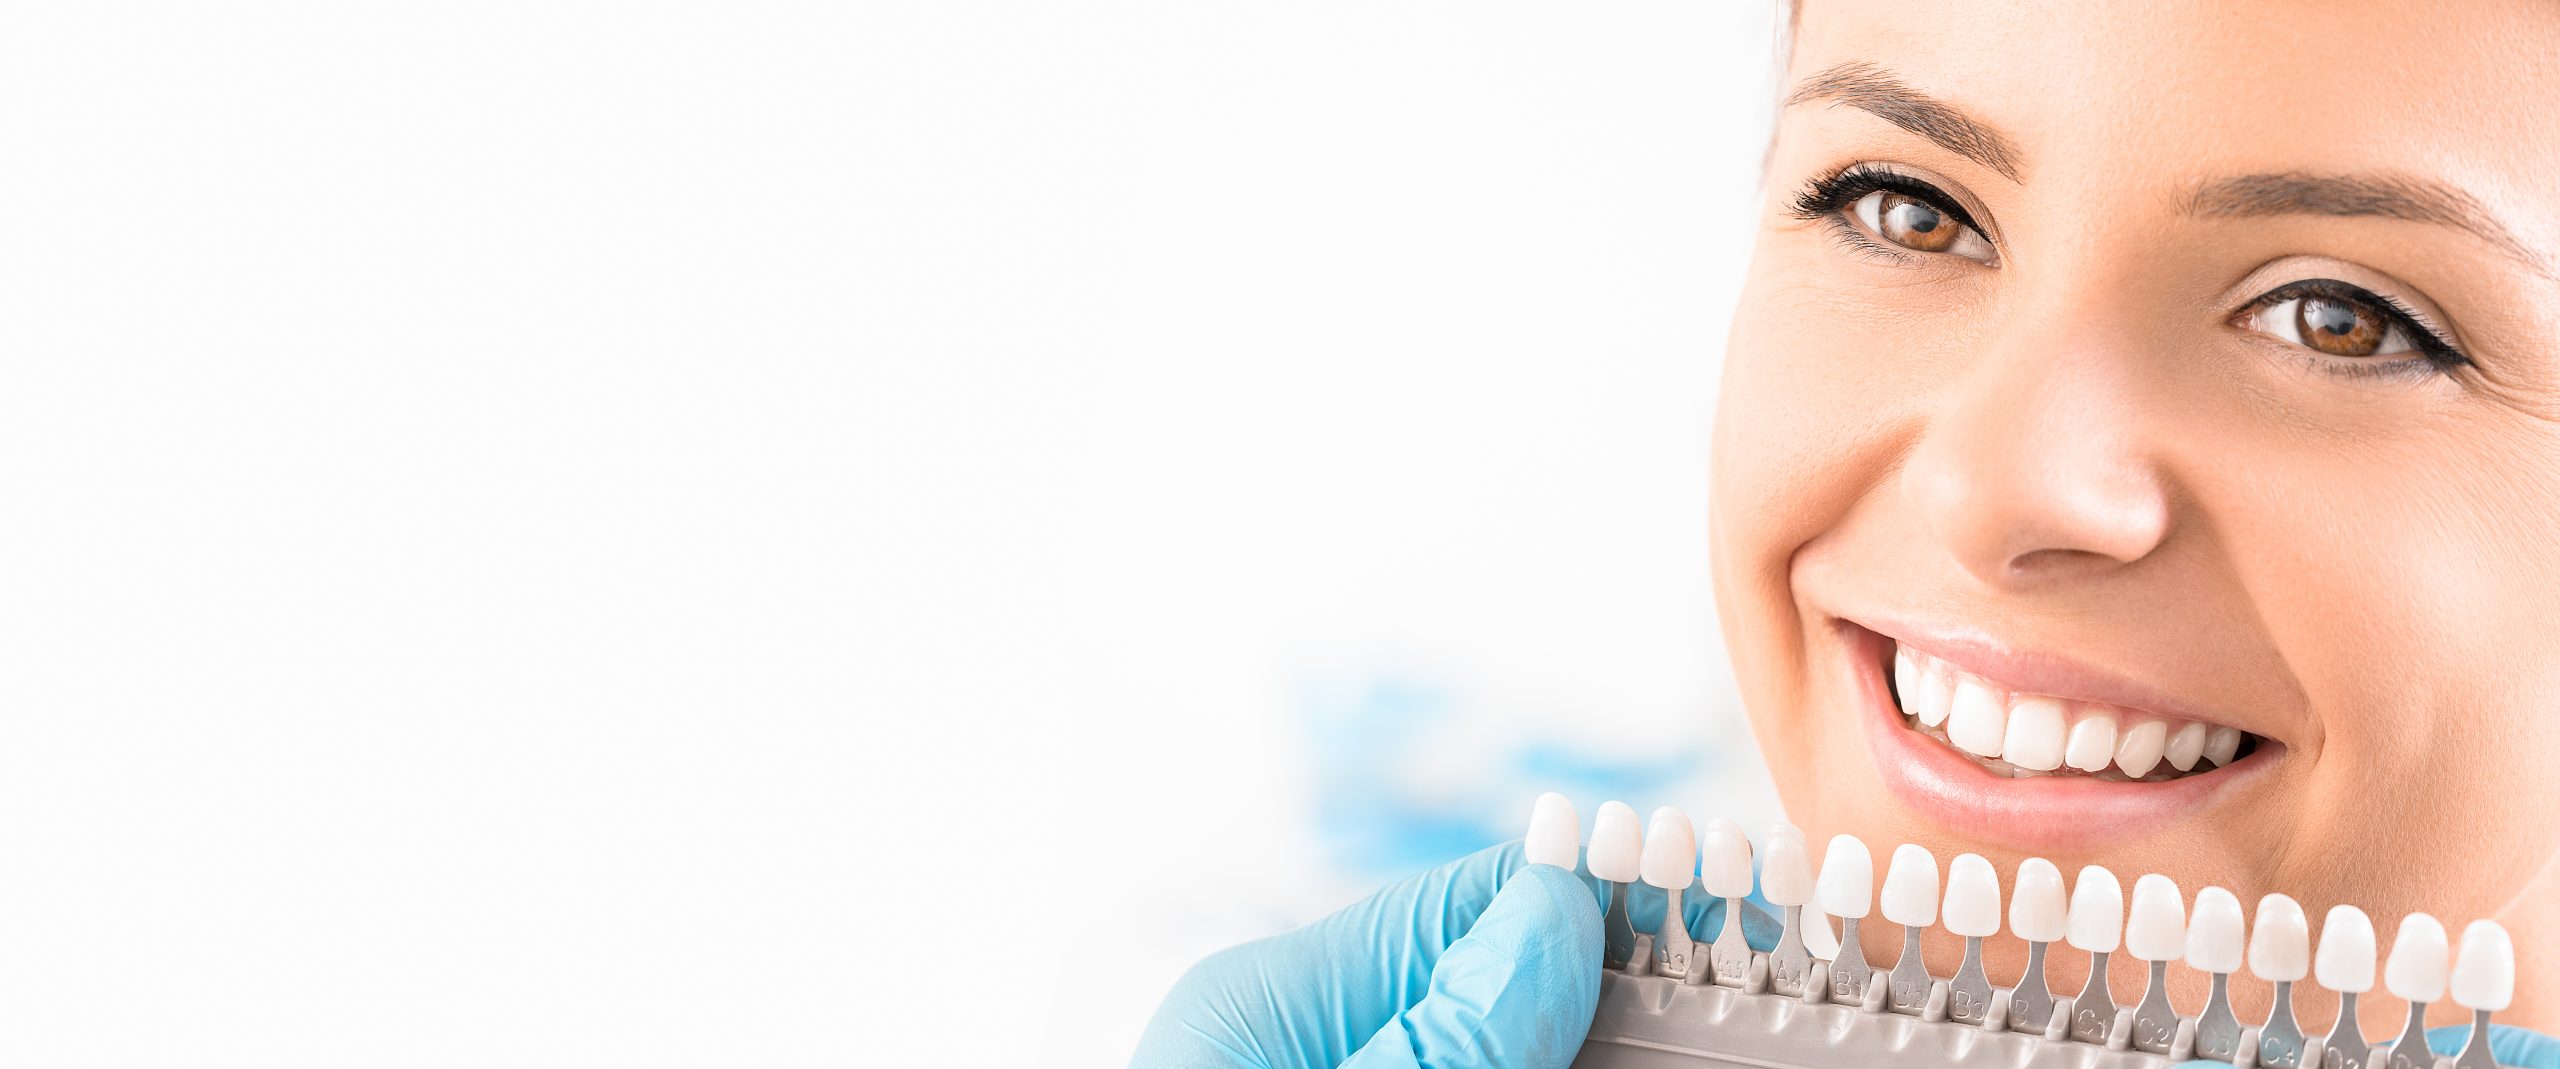 Dental Implants: The Most Reliable And Safe Method For Restoring Lost Teeth